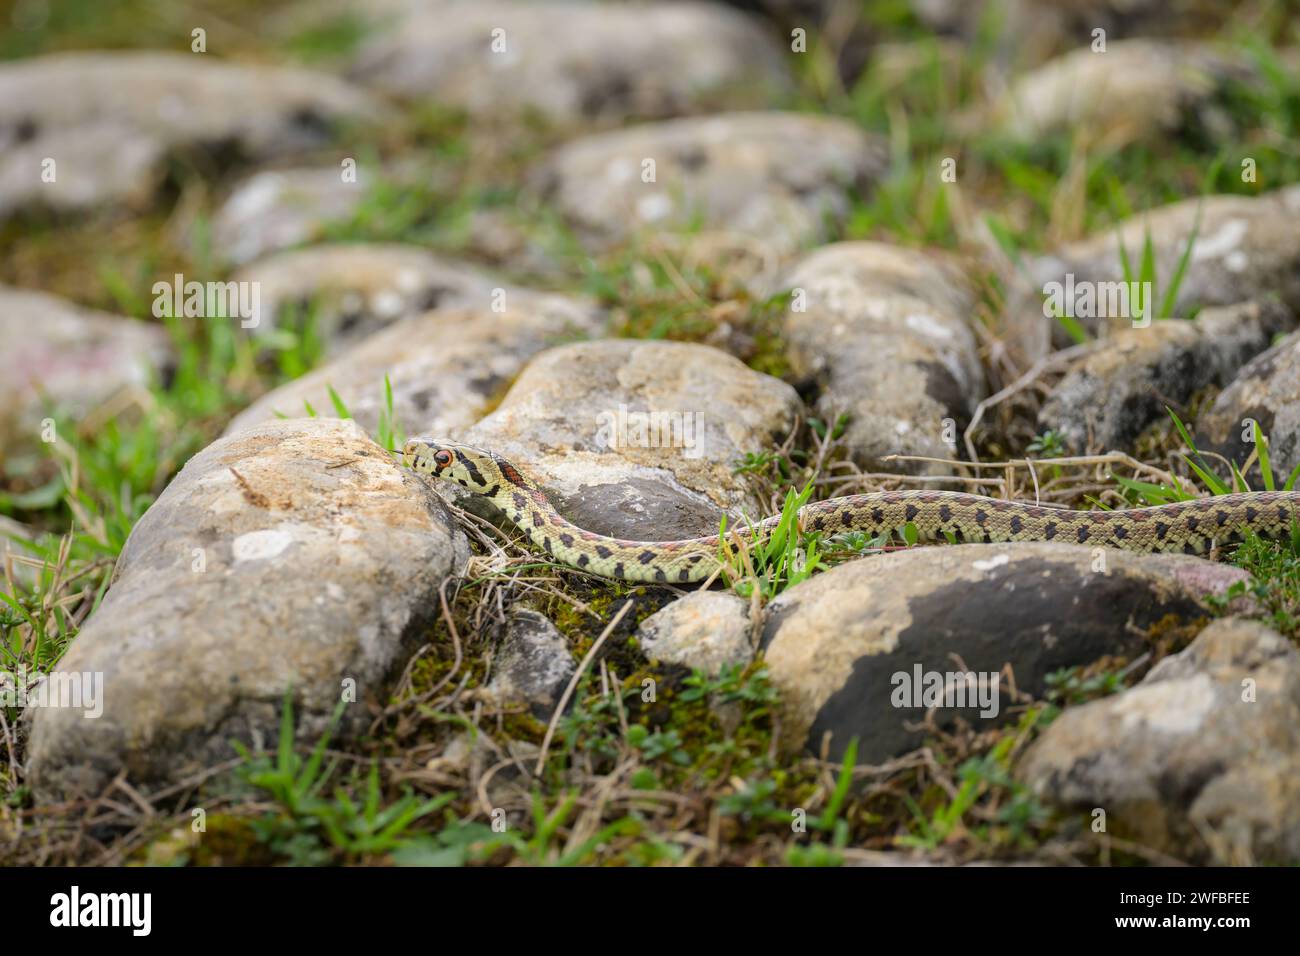 A young leopard snake resting on the ground, cloudy day in autumn, Cres Croatia Cres Croatia Stock Photo